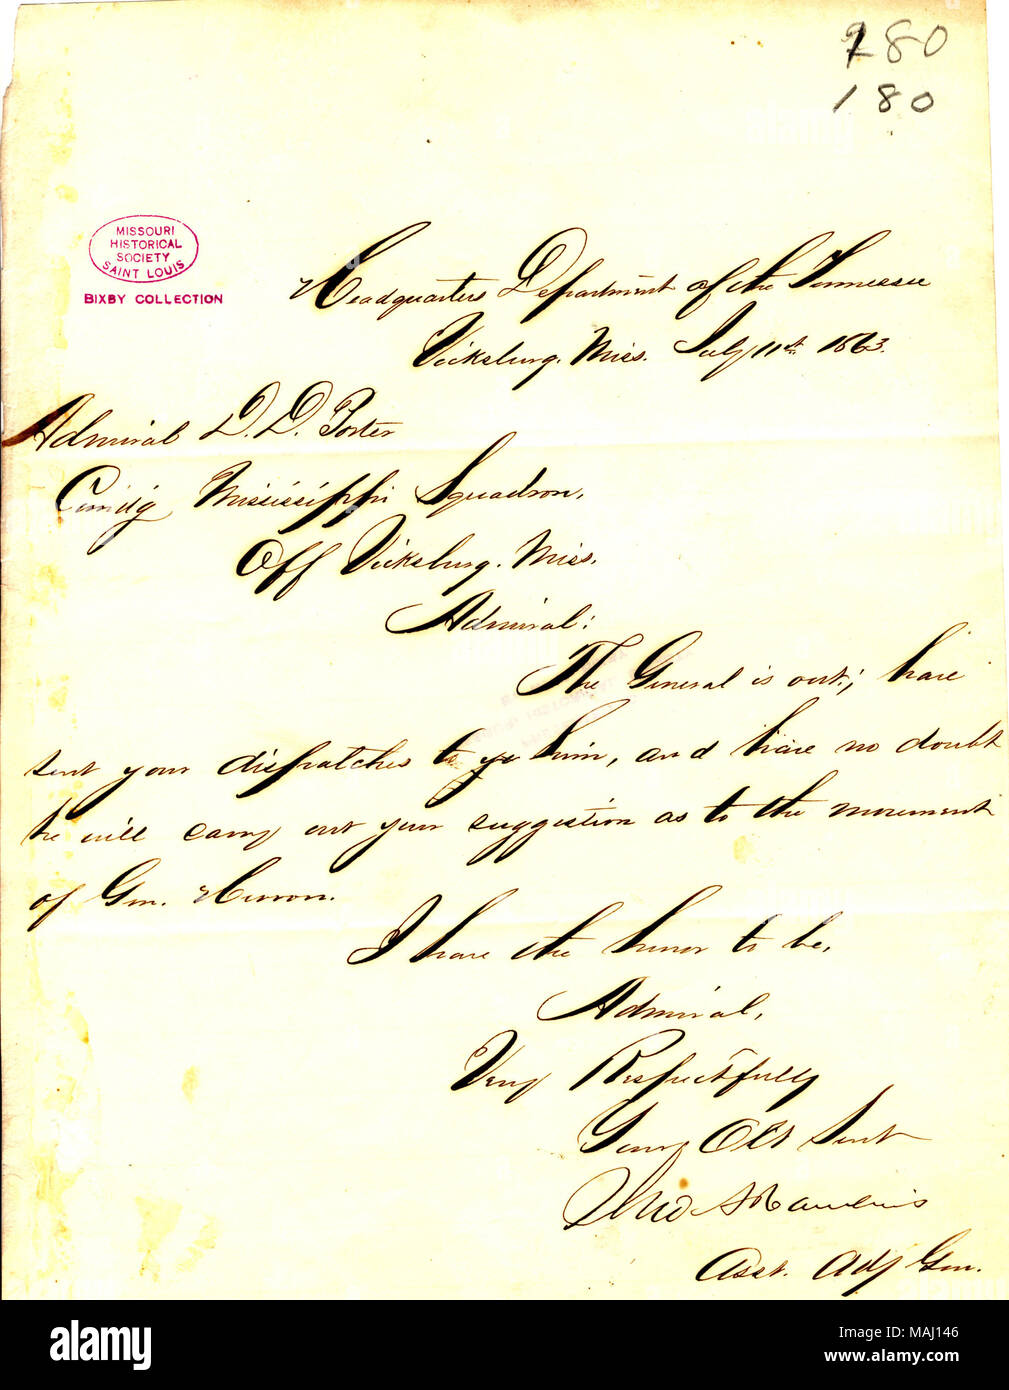 States, 'The General is out; have sent your dispatches to him, and have no doubt he will carry out your suggestion as to the movement of Gen. Herron.' Title: Note from Jno. S. Rawlins, headquarters, Department of the Tennessee, Vicksburg, Mississippi, to [David D.] Porter, July 11, 1863  . 11 July 1863. Rawlins, John S. Stock Photo